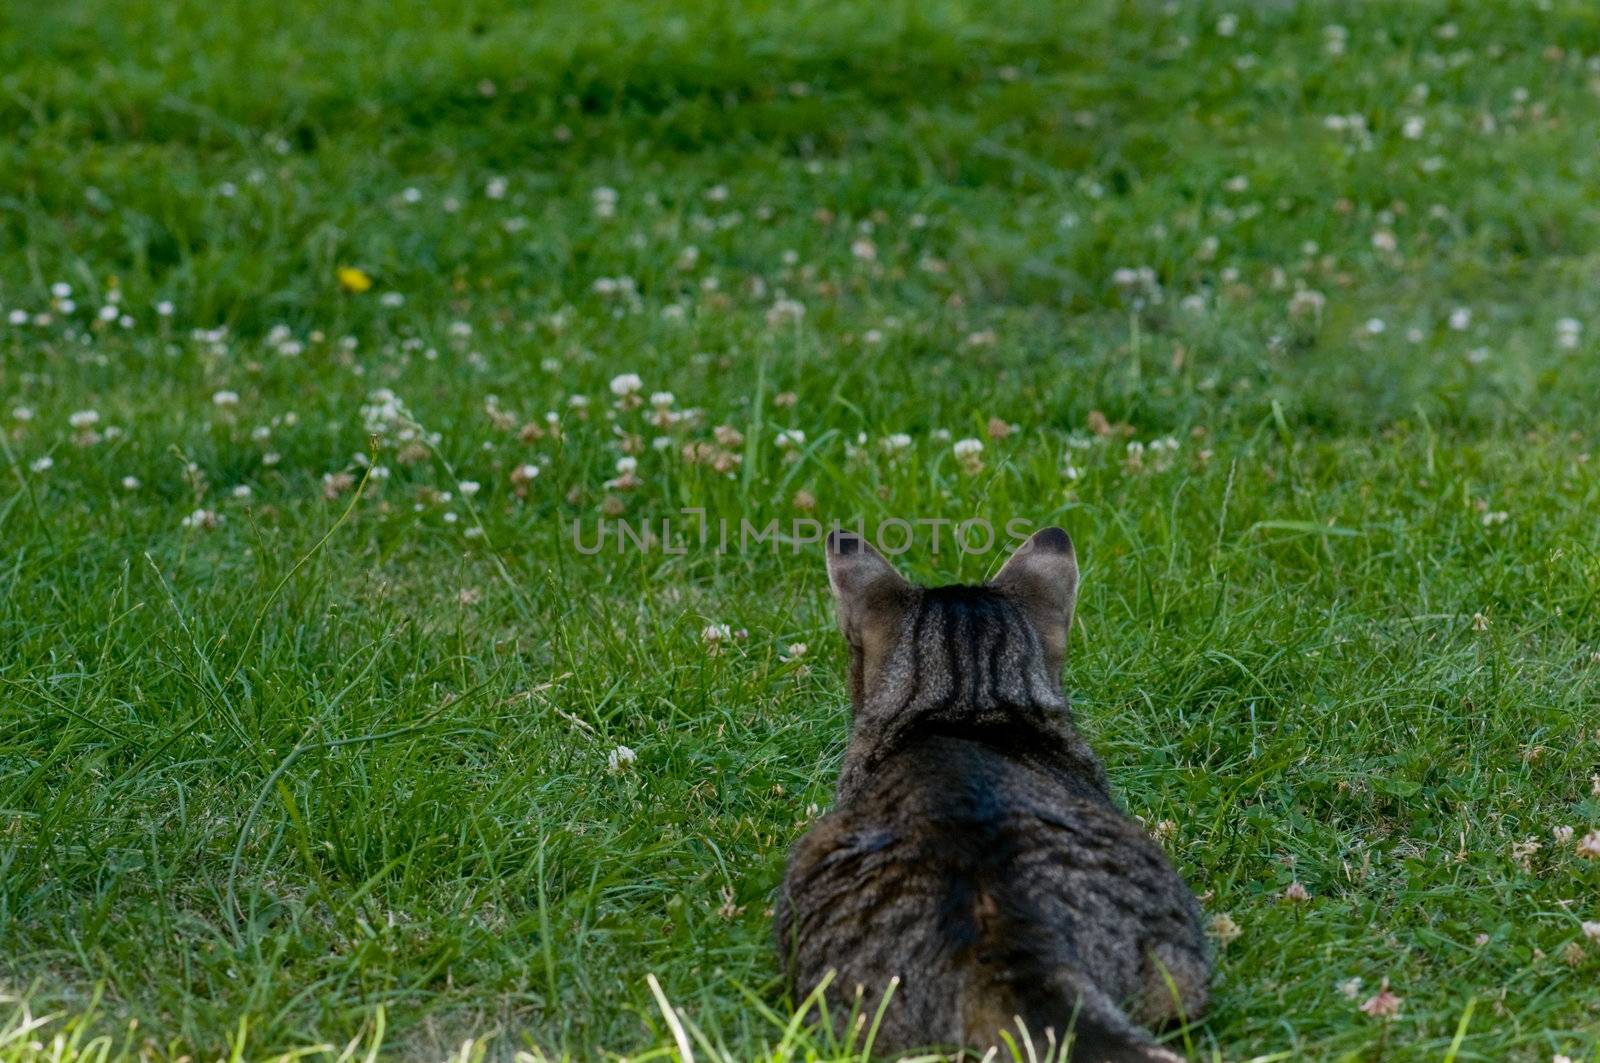 Curious domestic cat on a hunt. Grass in the foreground is sharp with blur background.